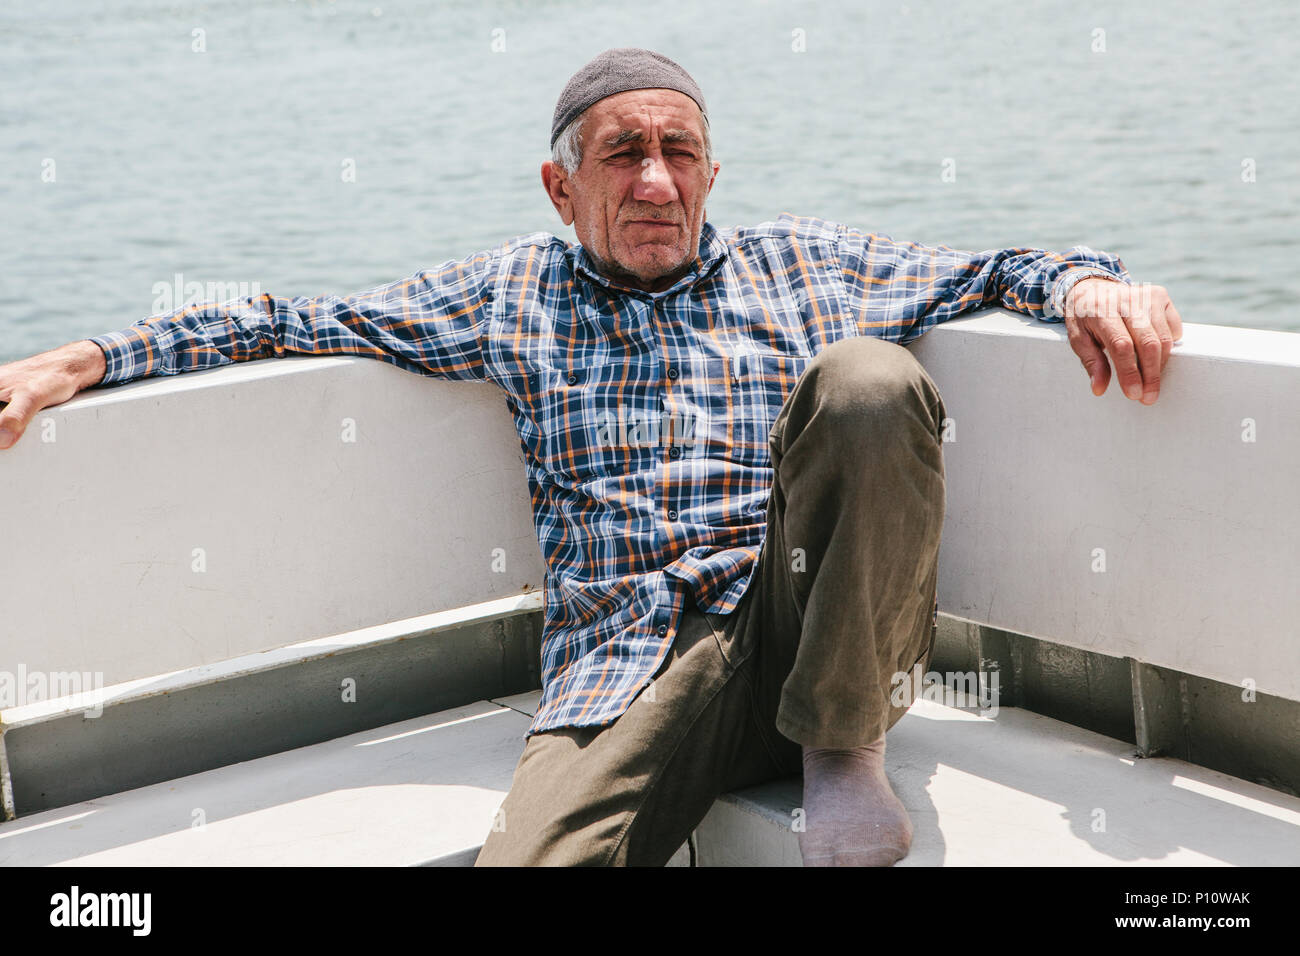 Istanbul, June 17, 2017: An elderly local man swims by ferry across the Bosphorus. Ordinary life in Turkey Stock Photo